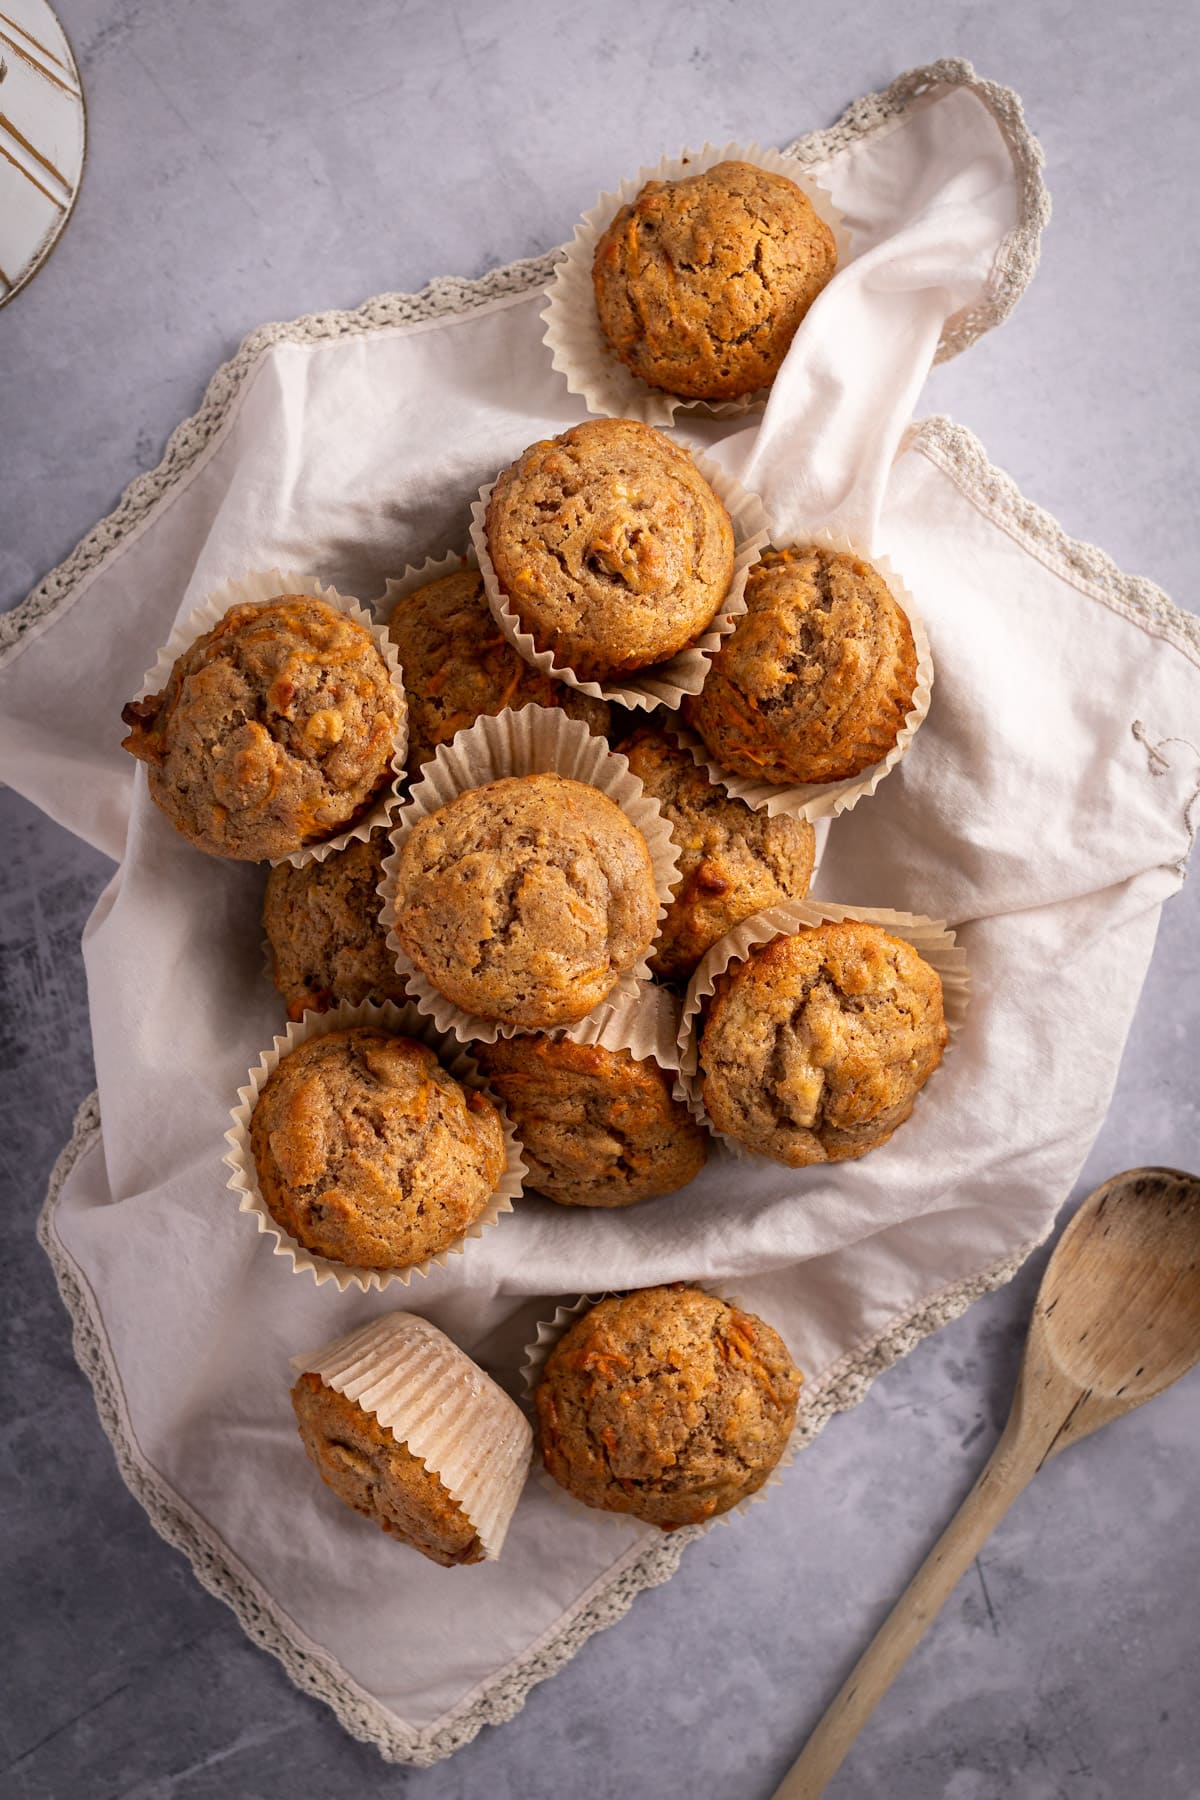 Banana carrot muffins scattered over a light pink cloth, next to a wooden spoon, on a dark grey table.